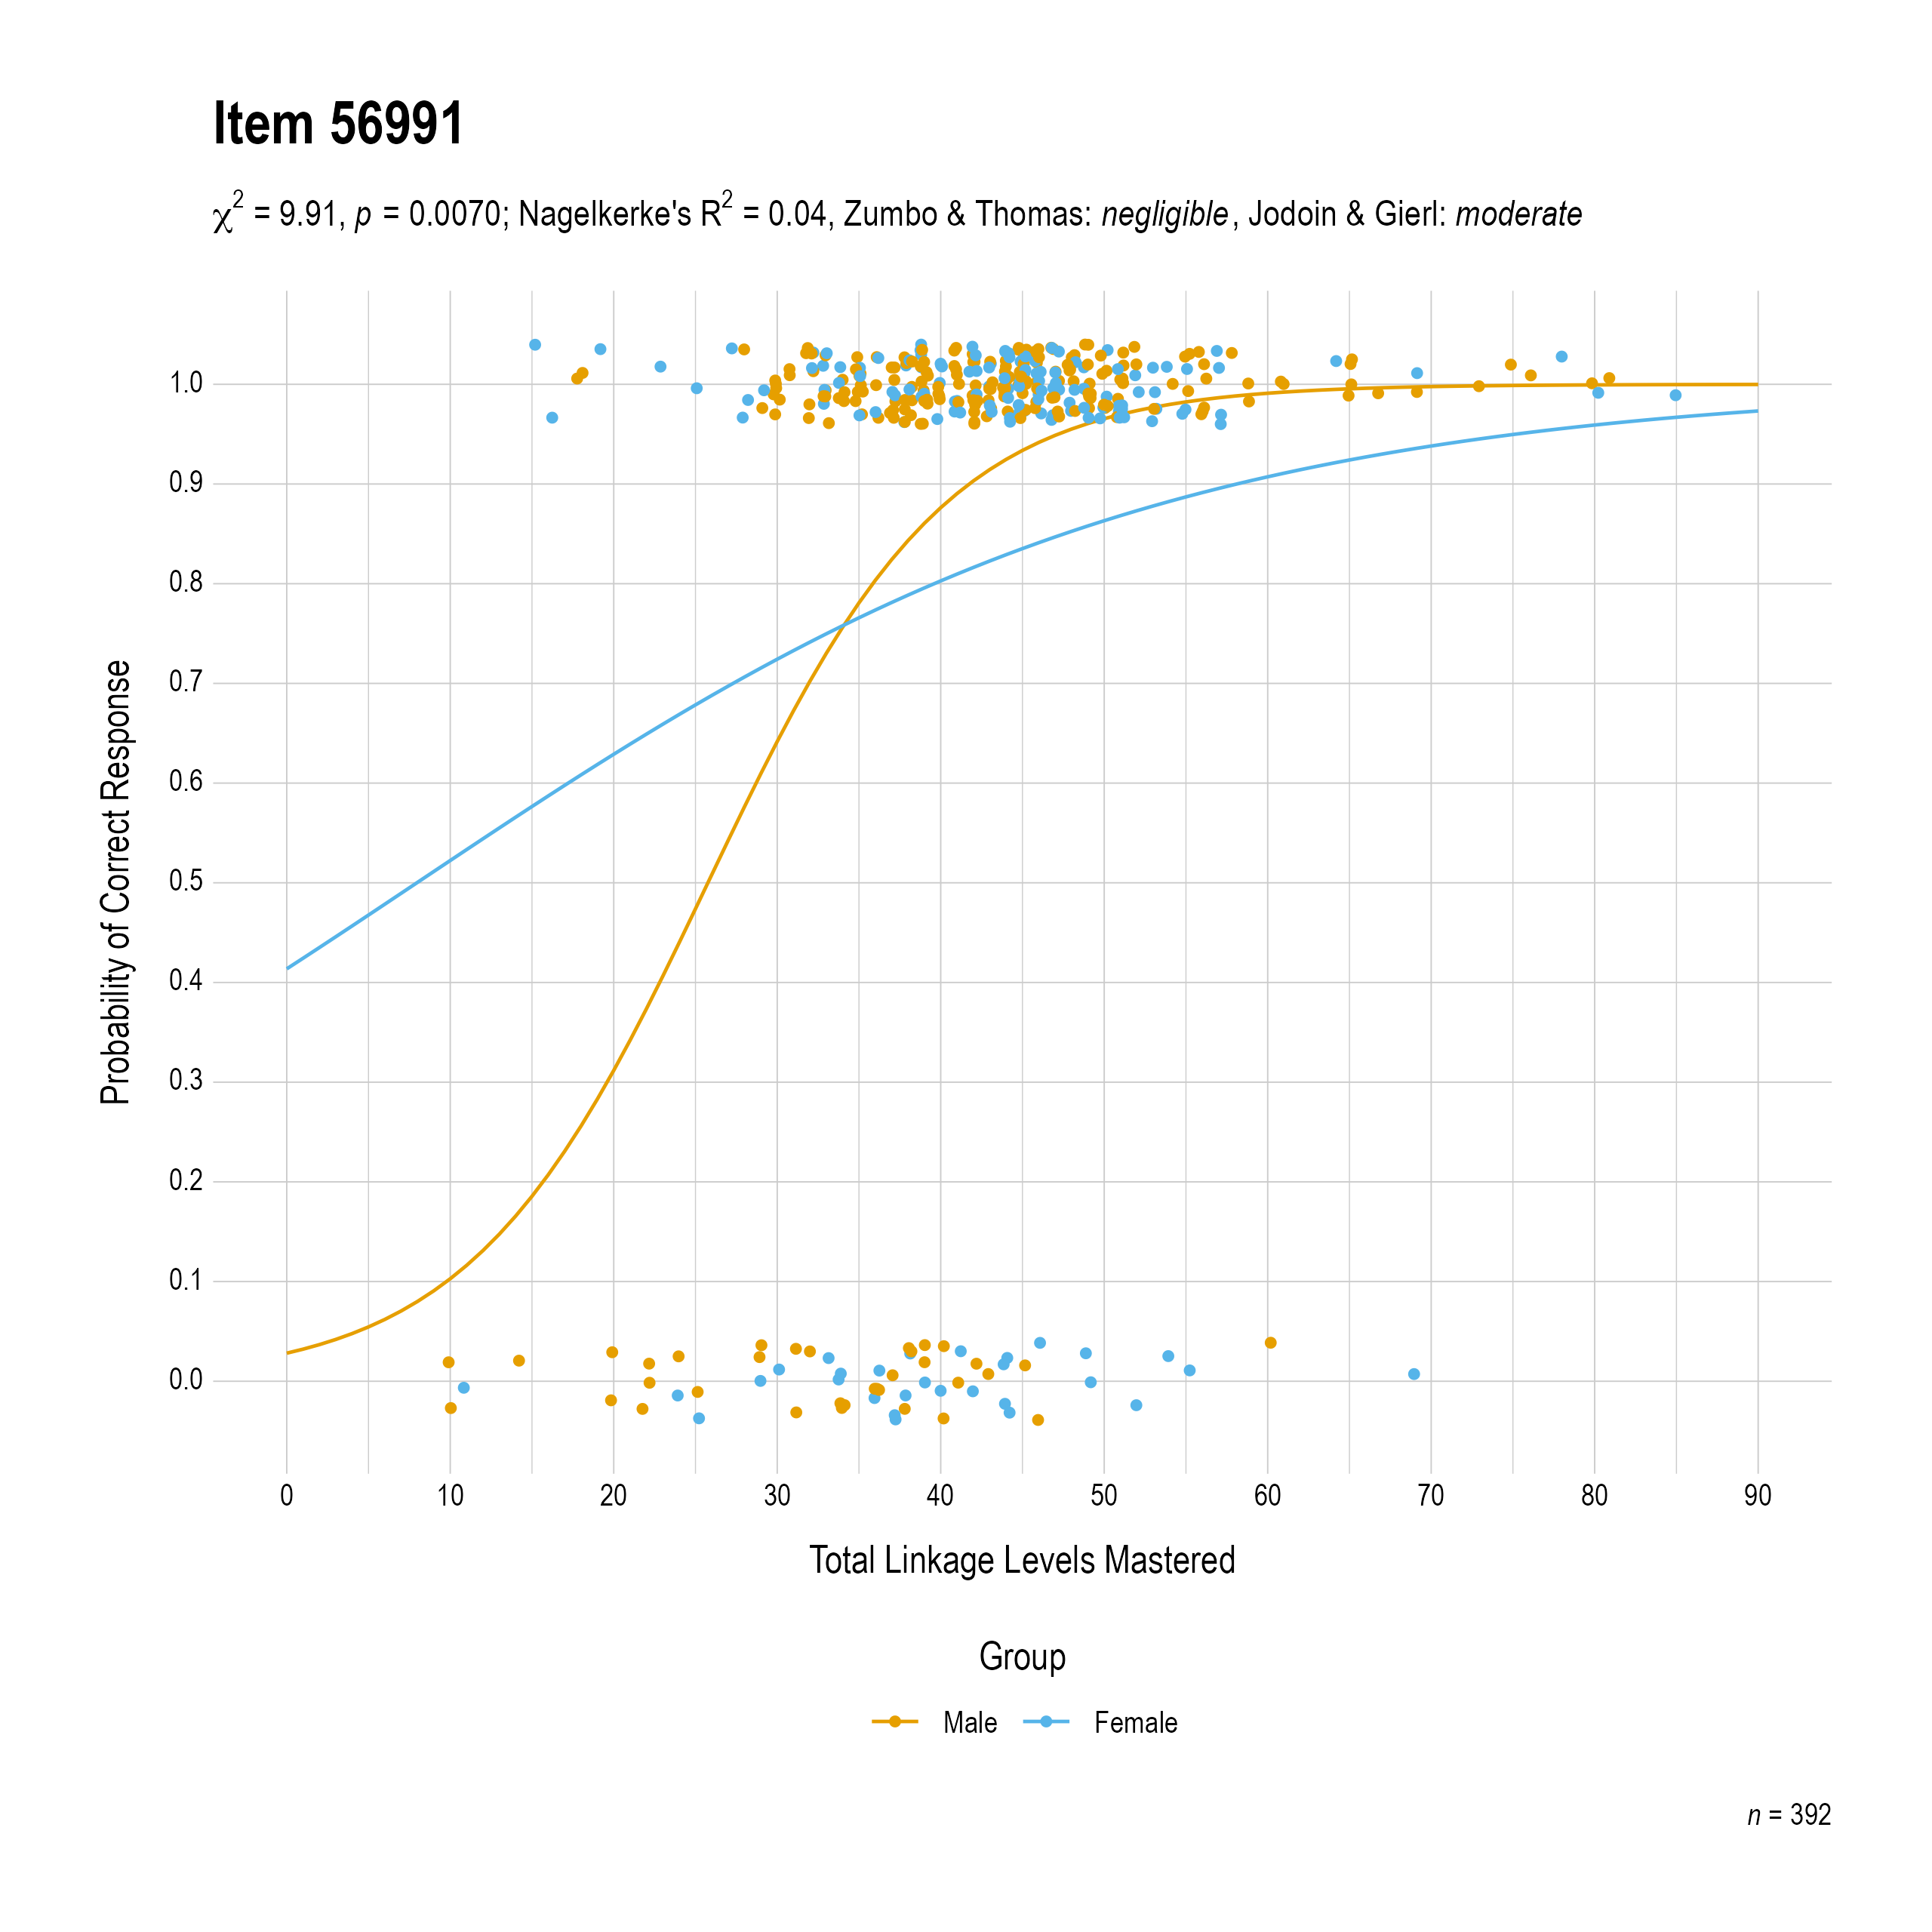 The plot of the combined gender differential item function evidence for English language arts item 56991. The figure contains points shaded by group. The figure also contains a logistic regression curve for each group. The total linkage levels mastered in is on the x-axis, and the probability of a correct response is on the y-axis.